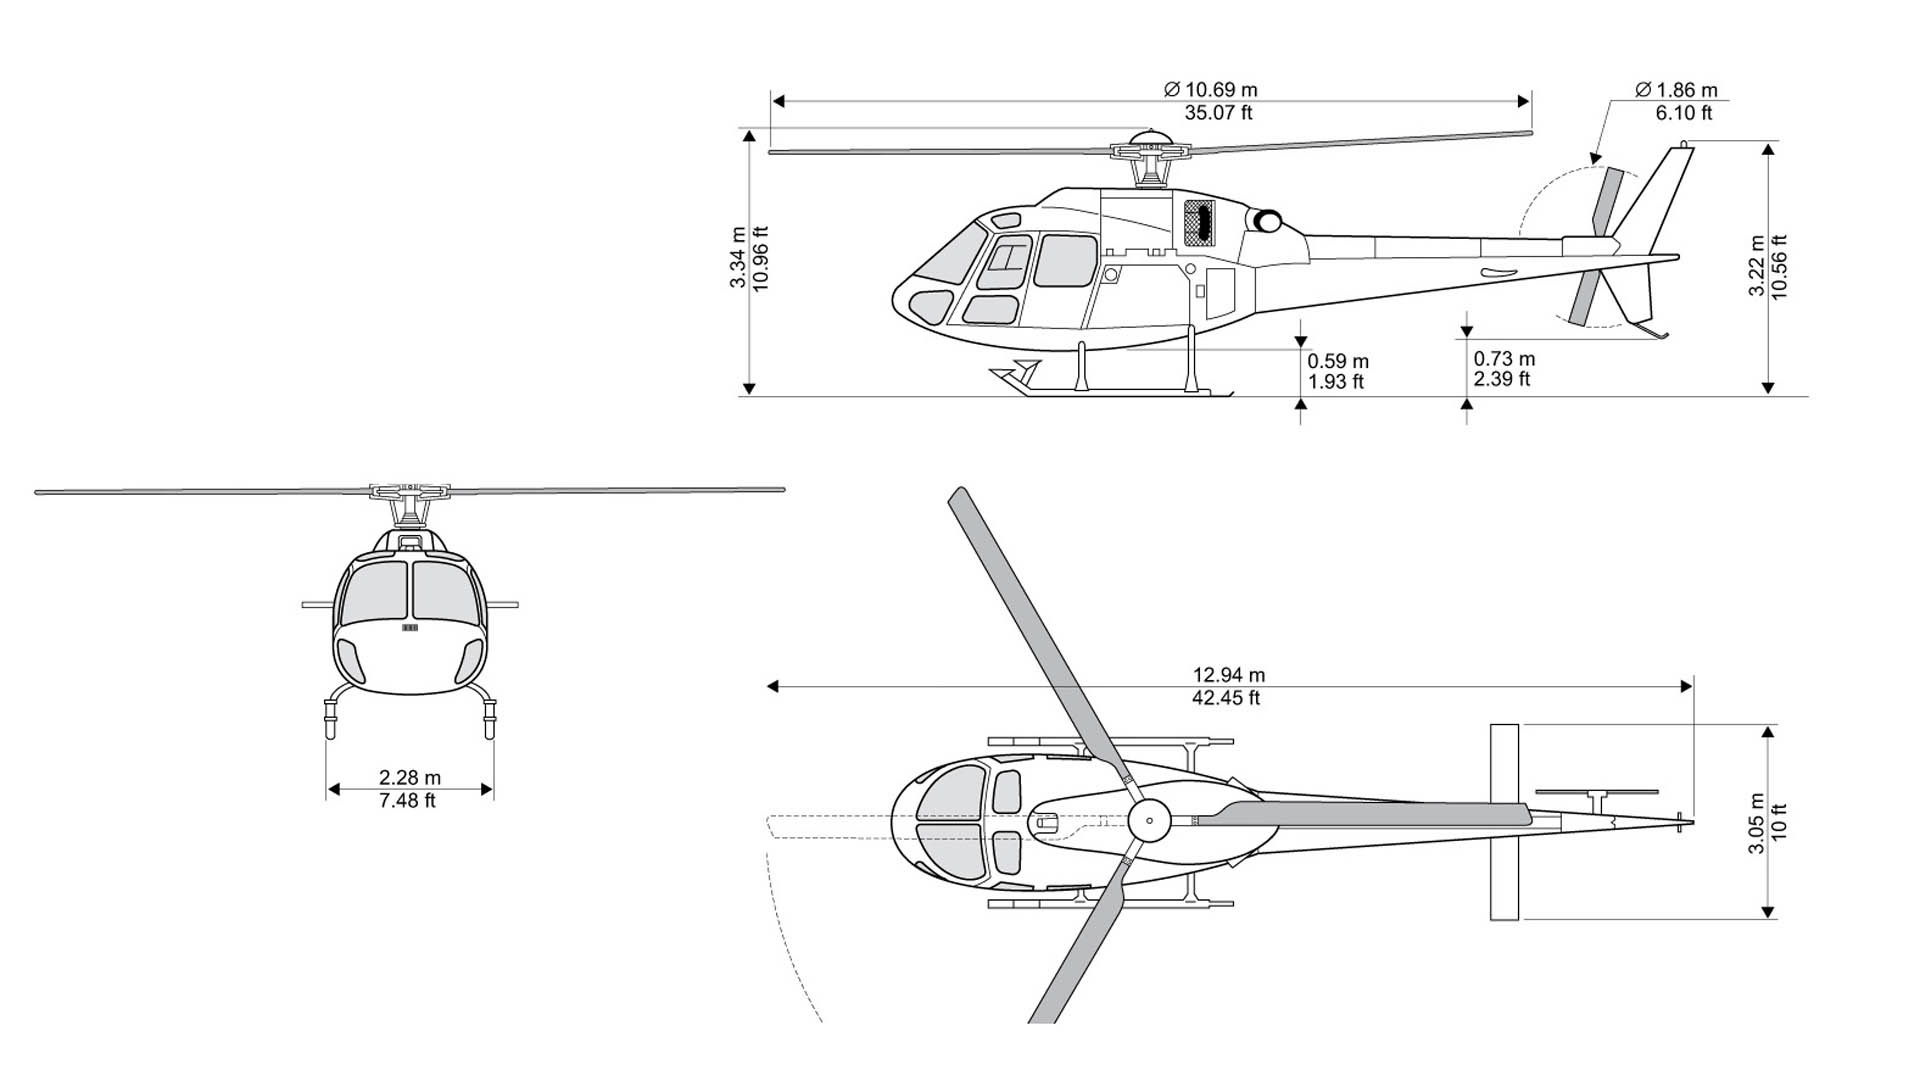 Airbus Eurocopter AS355 dimensions